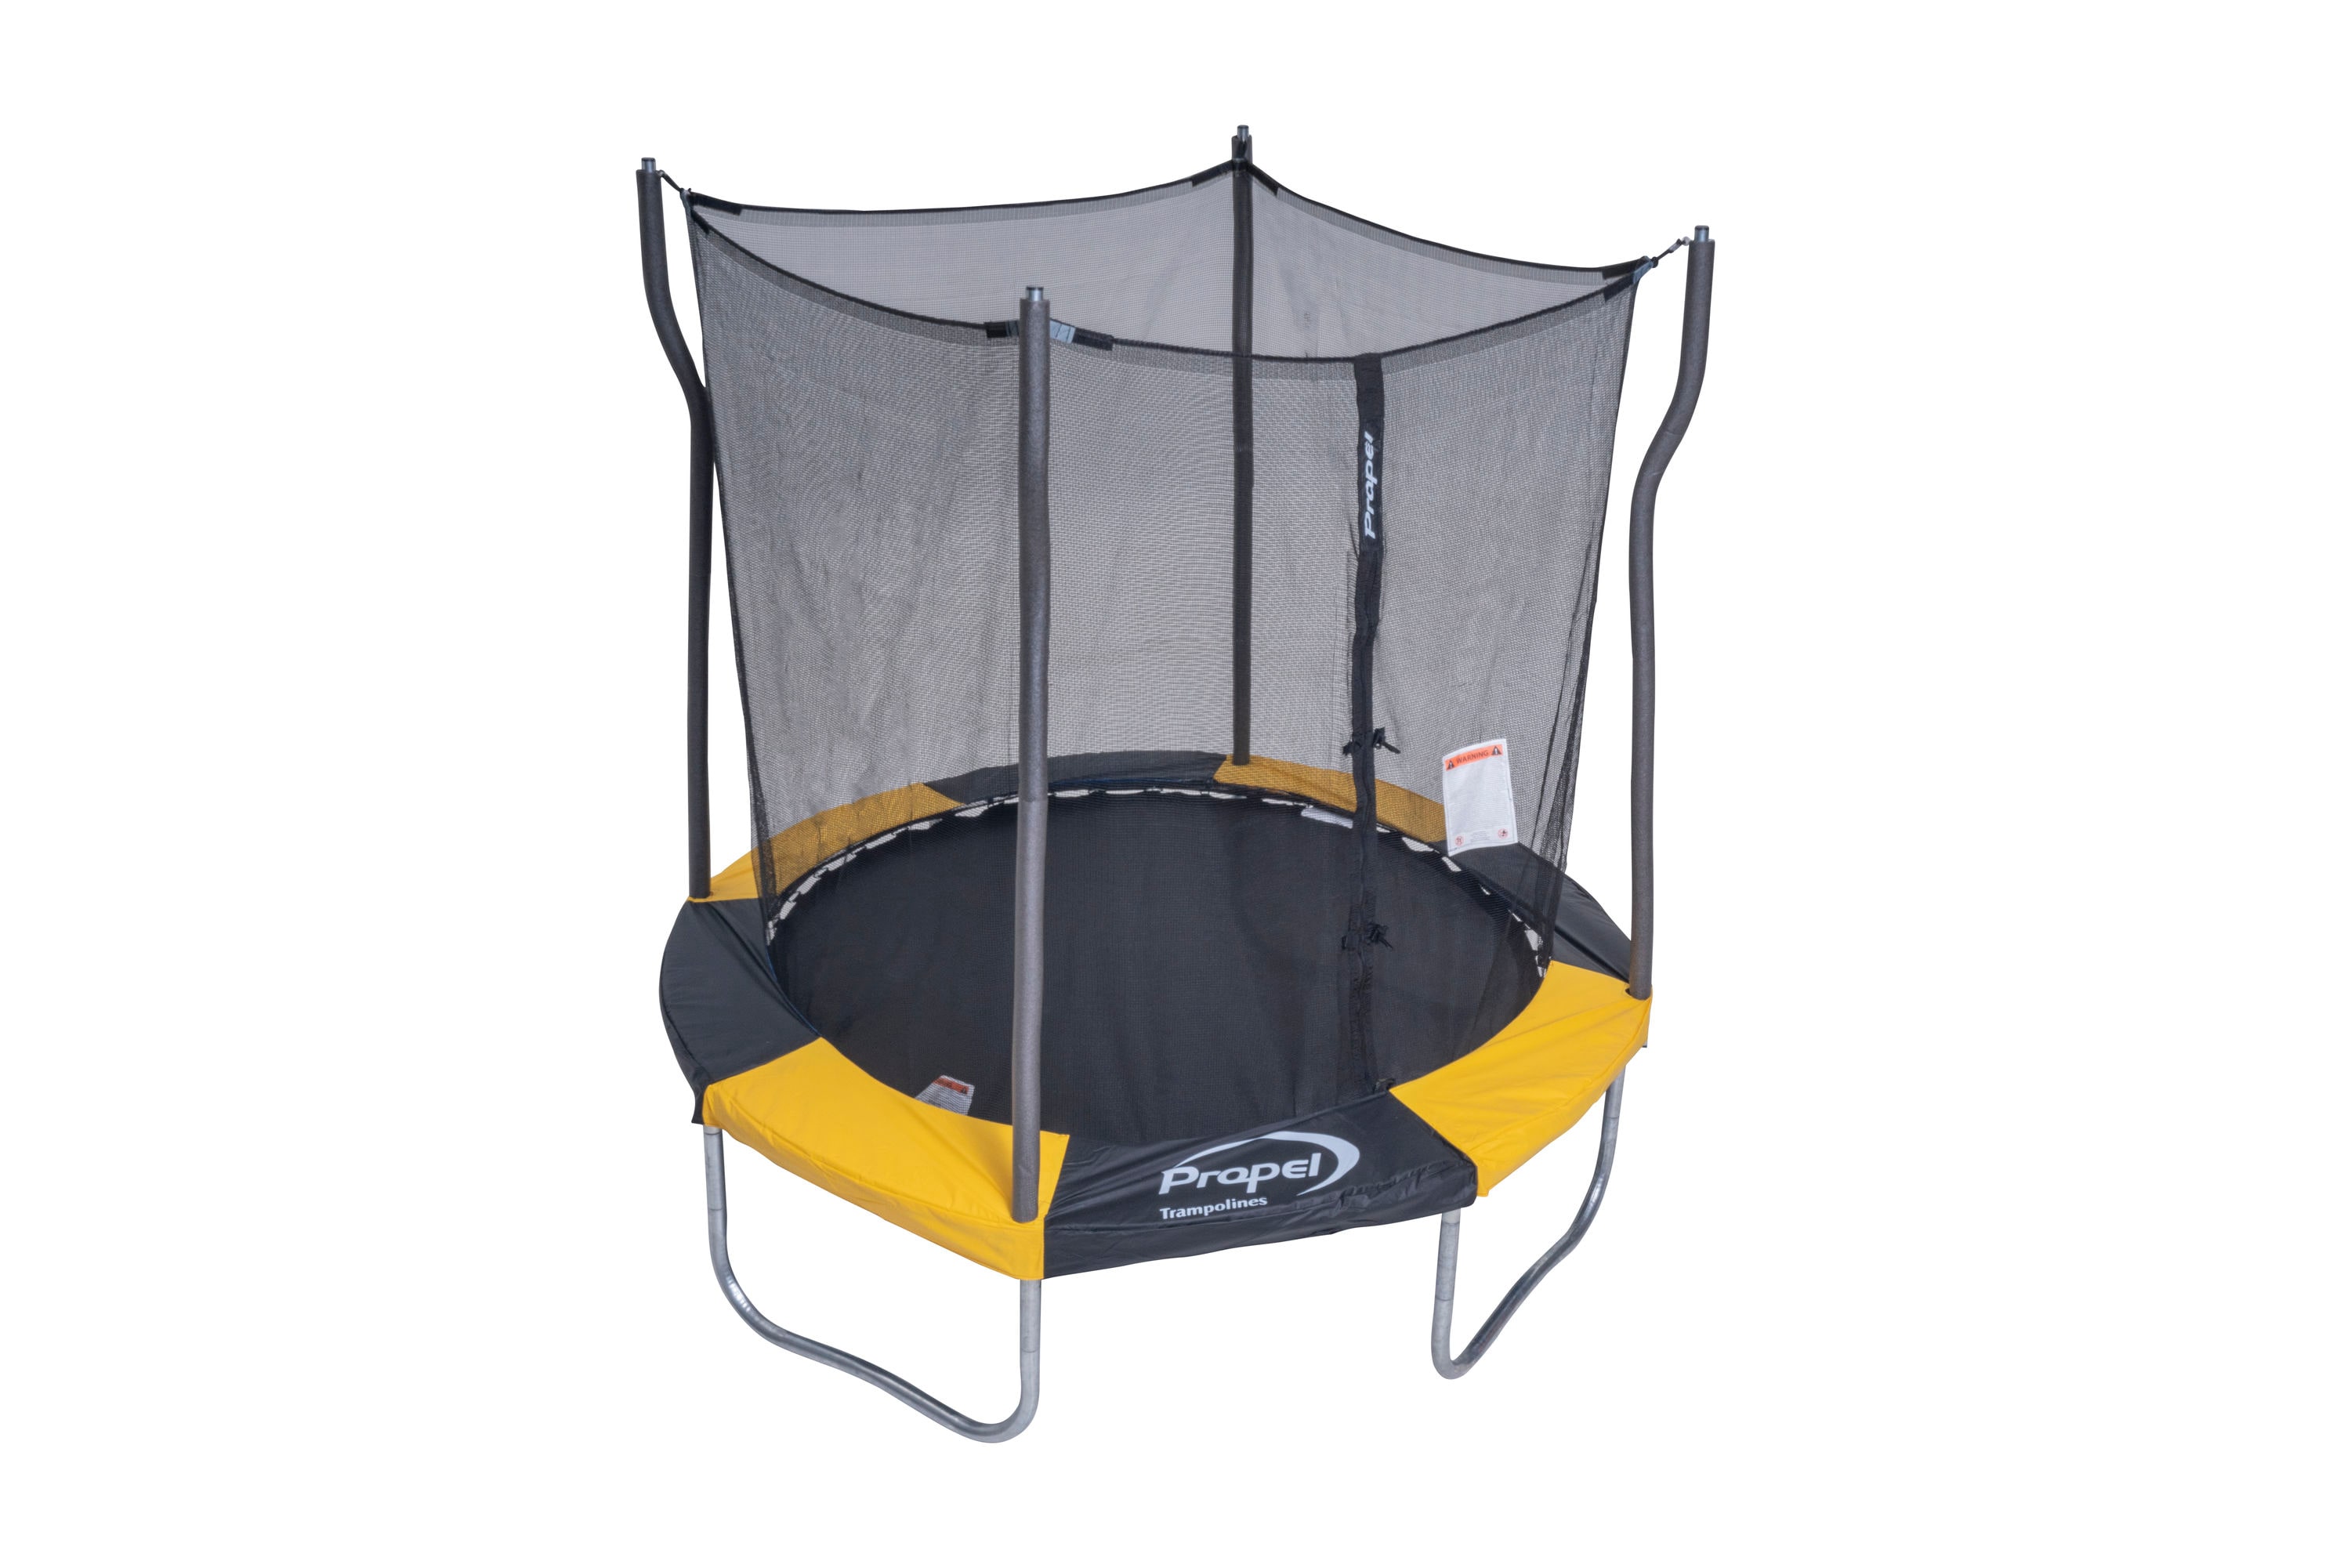 BRAND NEW 14 foot trampoline with safety enclosure PROPEL 